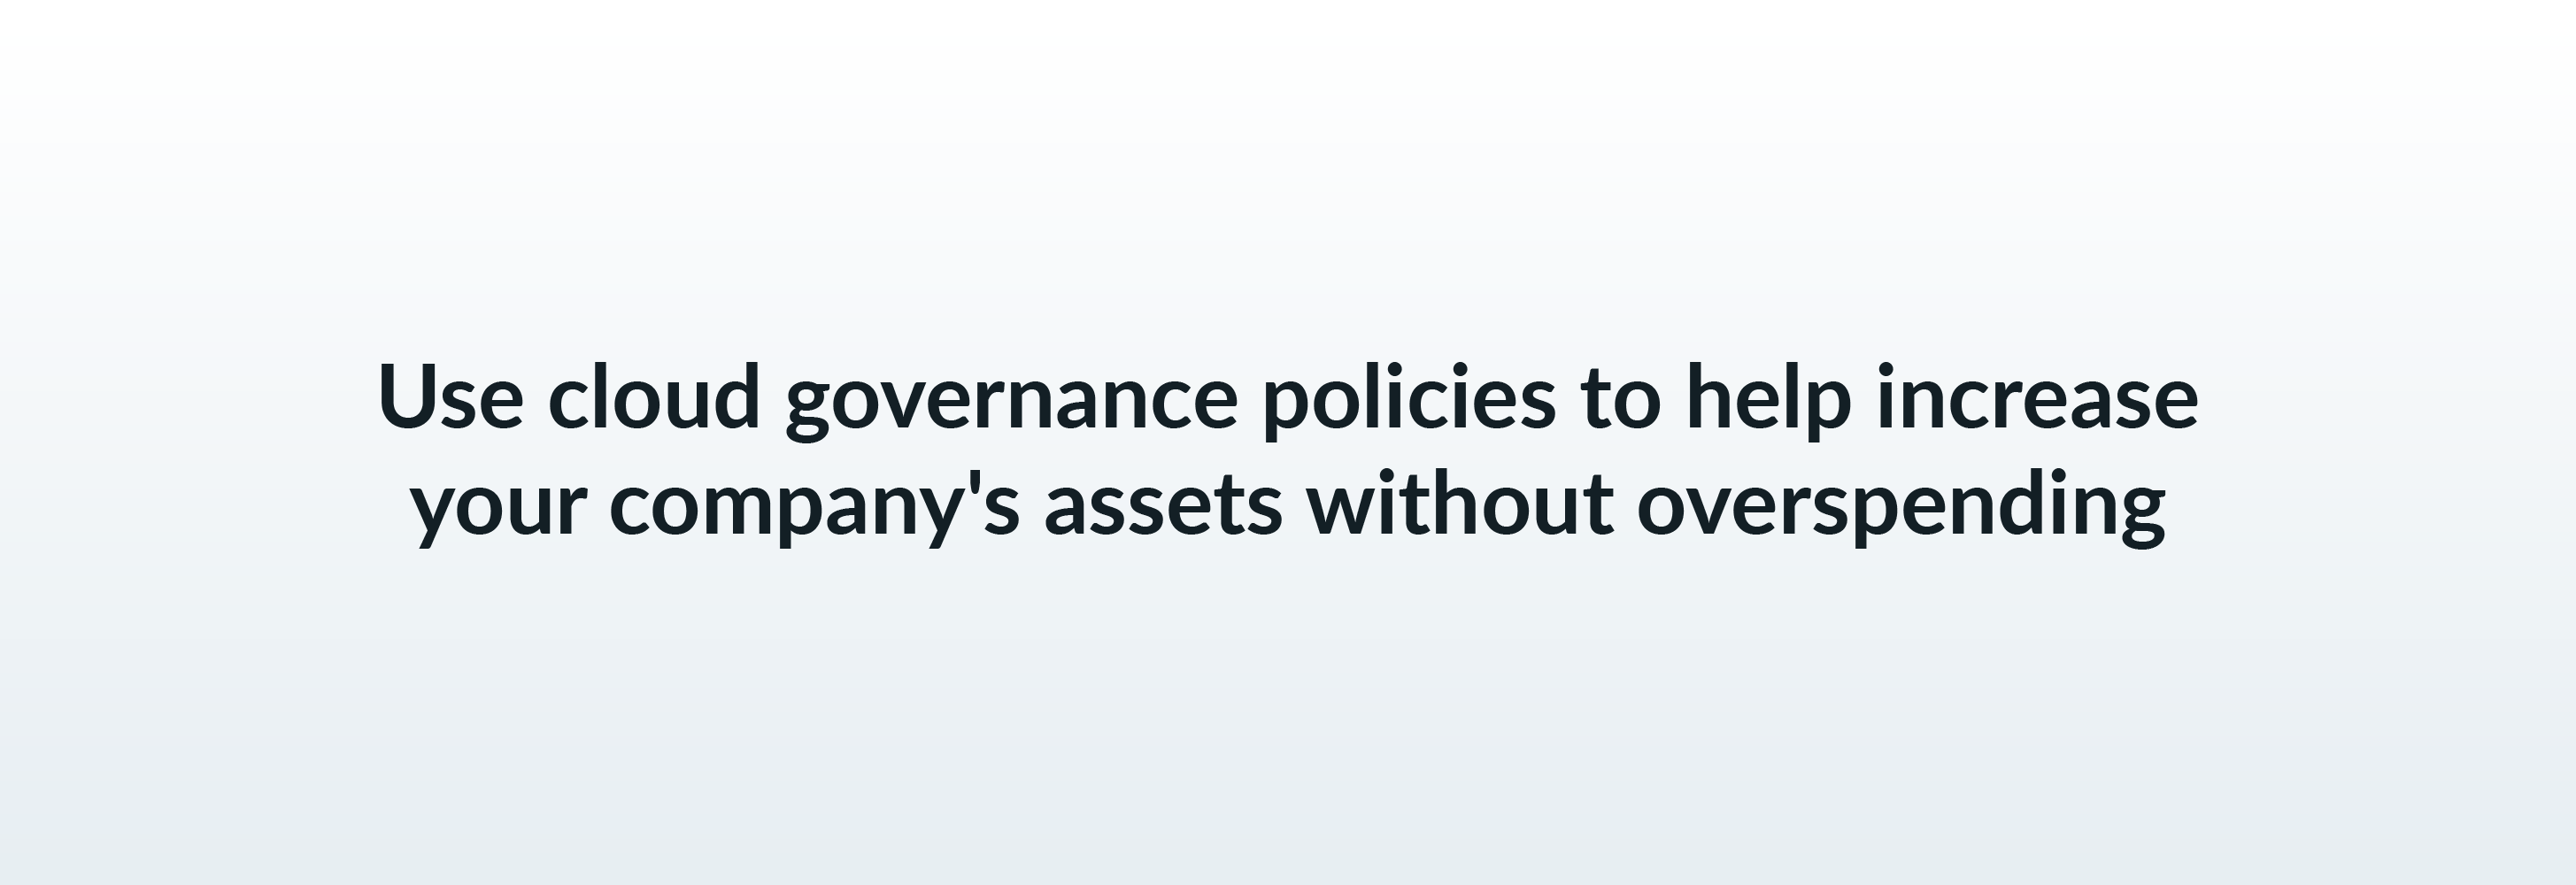 Use cloud governance policies to help increase your company's assets without overspending